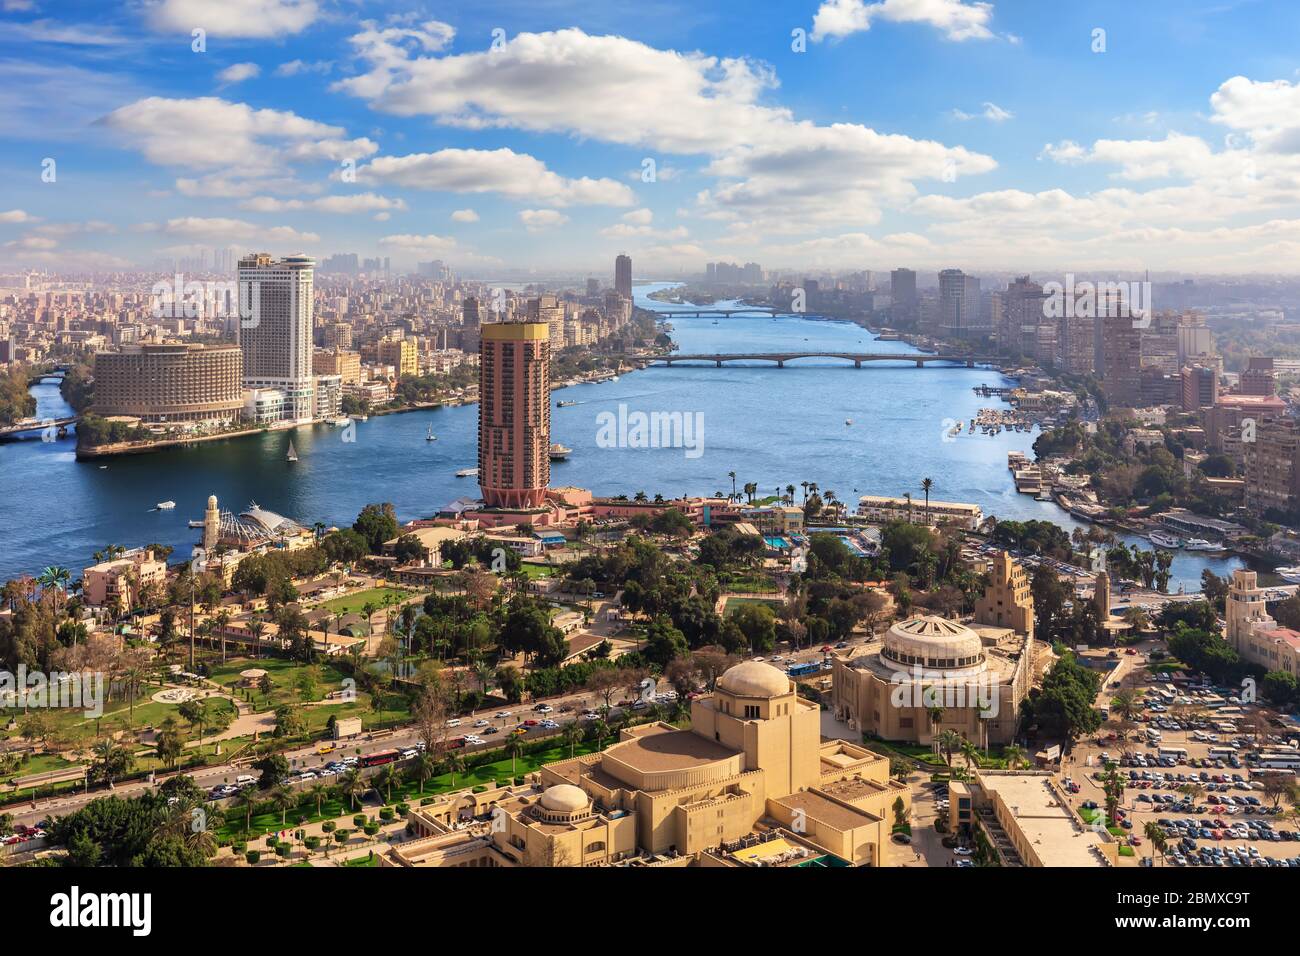 The Nile and the center of Cairo, Egypt, view from above Stock Photo